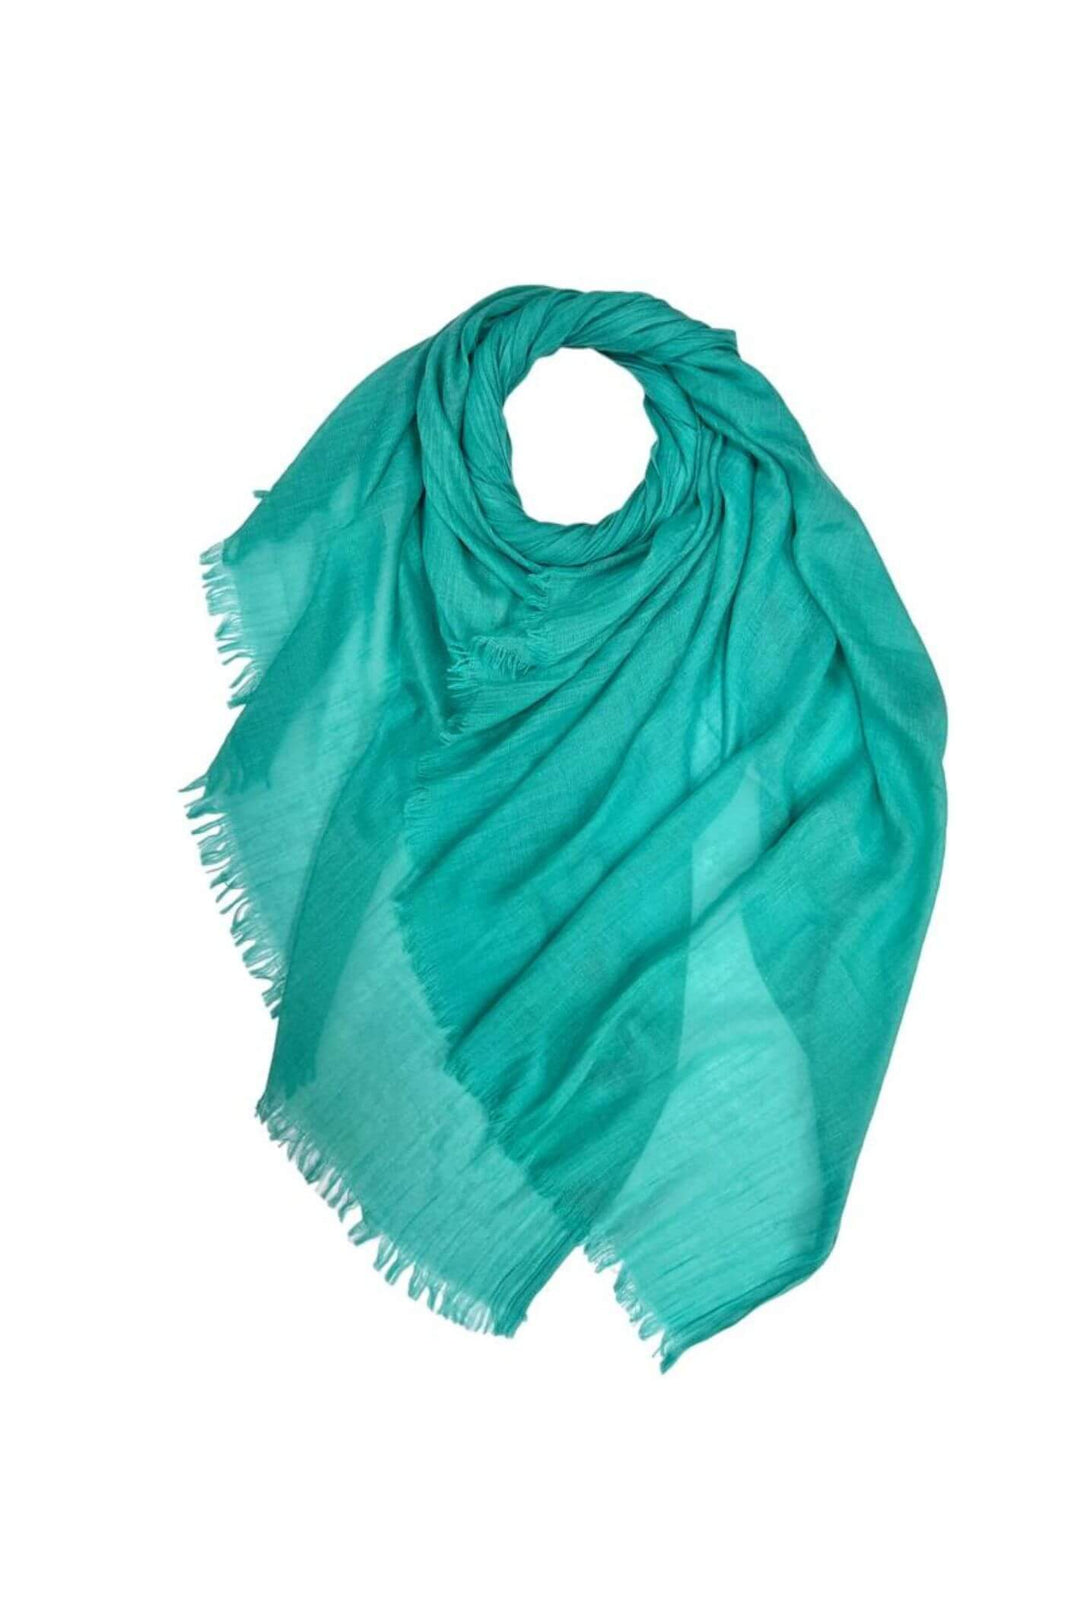 Turquoise Cotton Woven Scarf With Fringed Edge